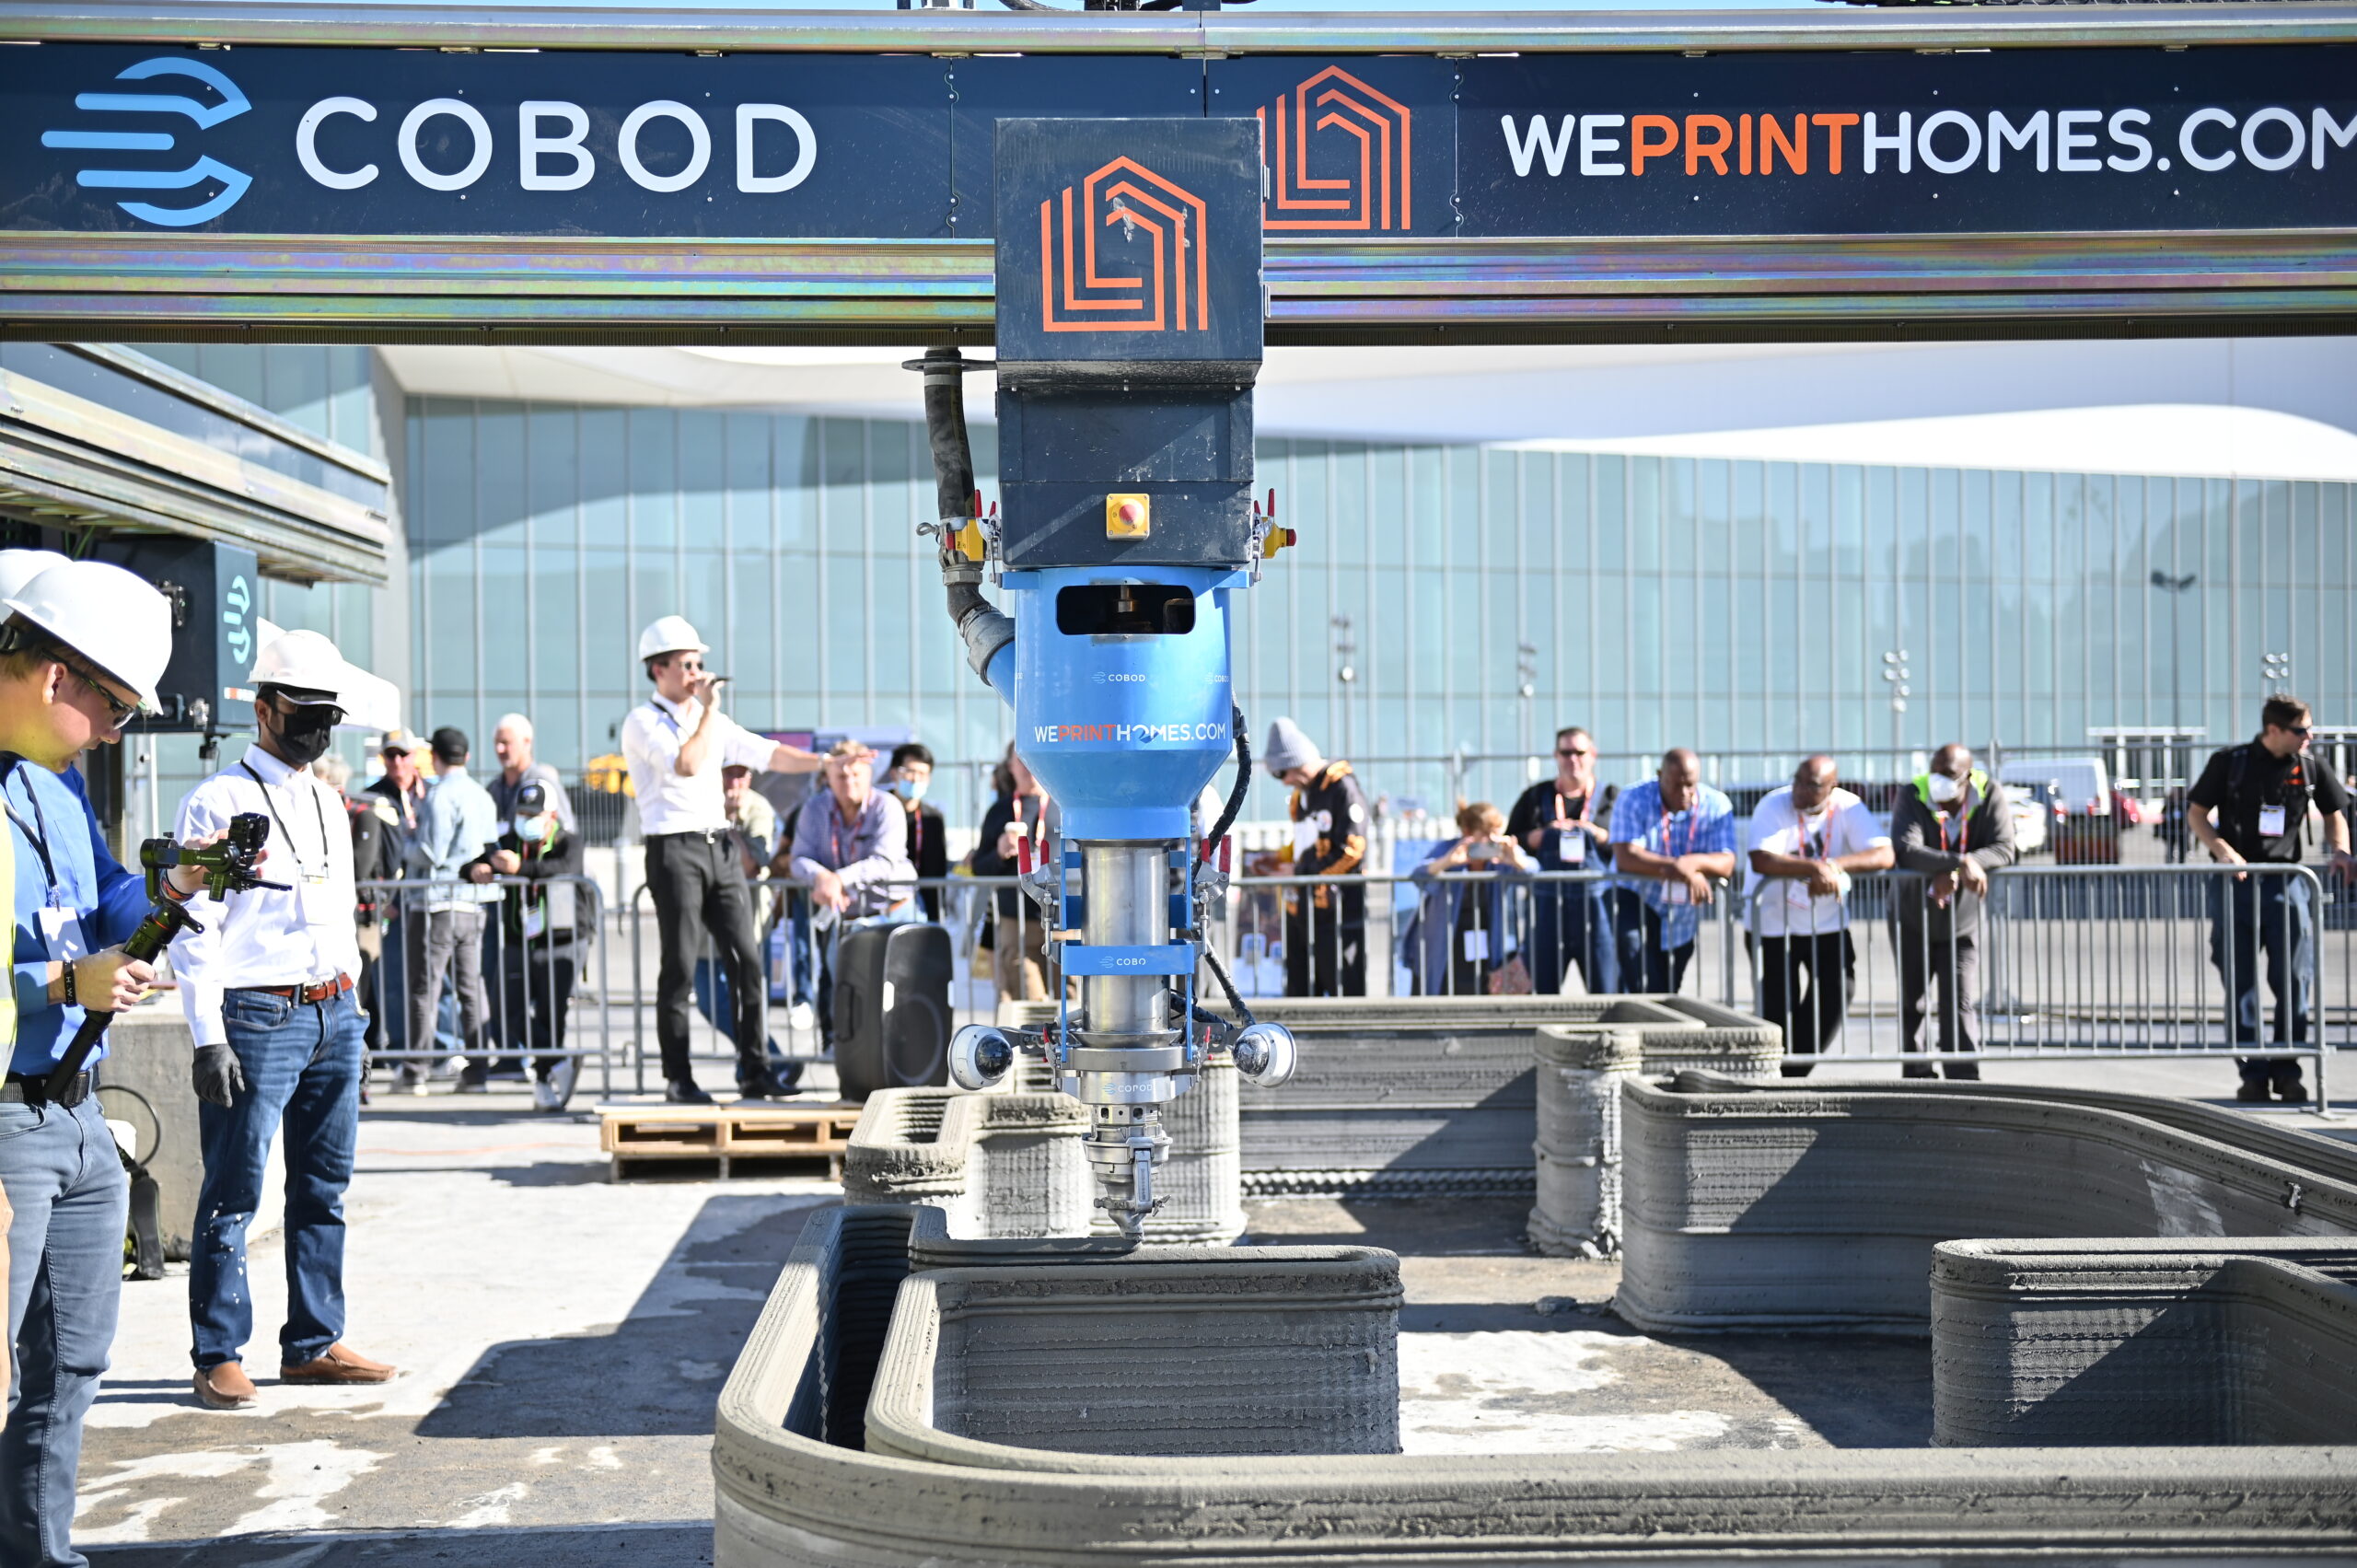 A demonstration of a large 3D printer making a house. Text on the arm of the printer reads "Cobod" and "We print homes.com"